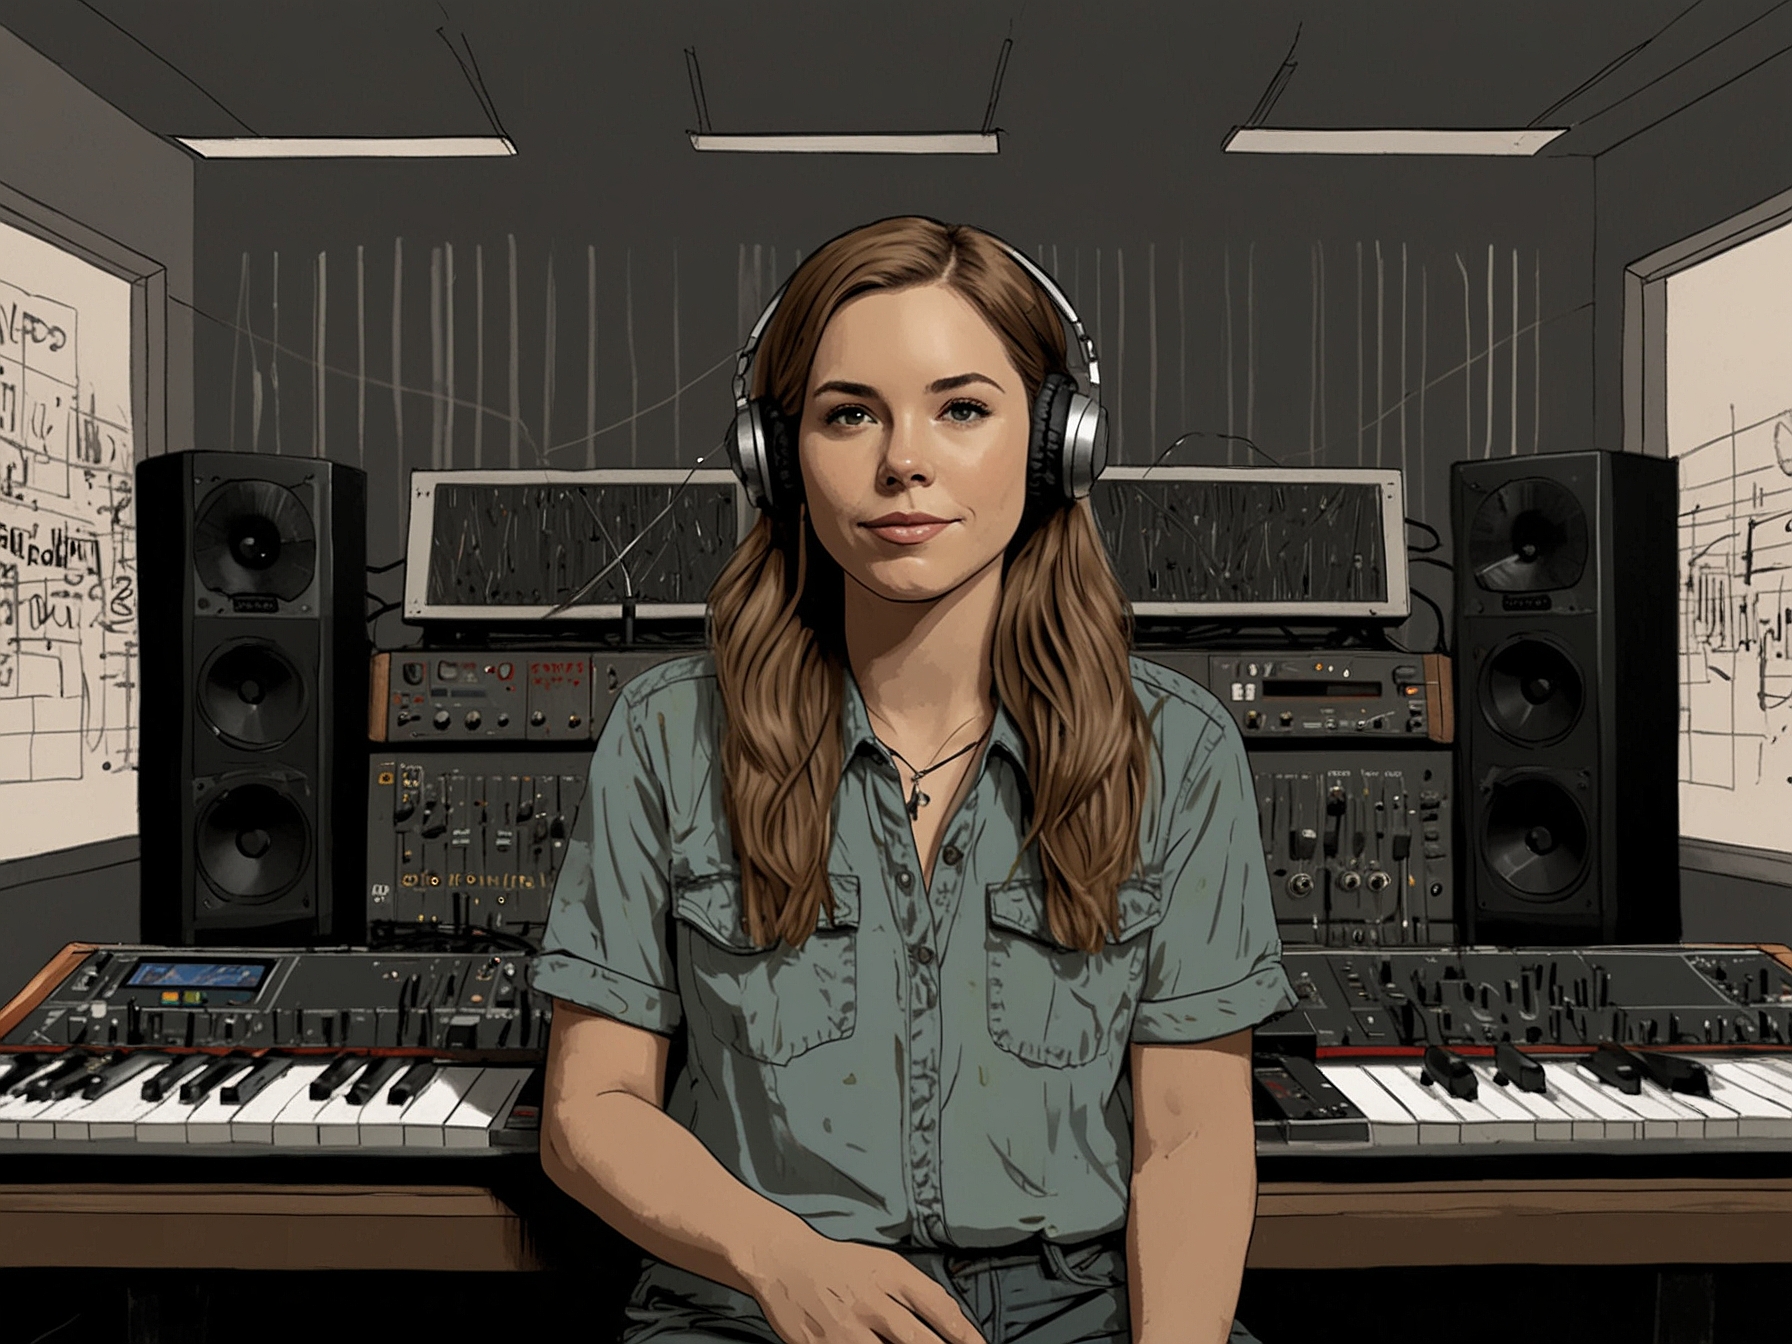 Chelsea Warner in a recording studio, surrounded by music production equipment like synthesizers and digital audio workstations, symbolizing her shift from singing to producing.